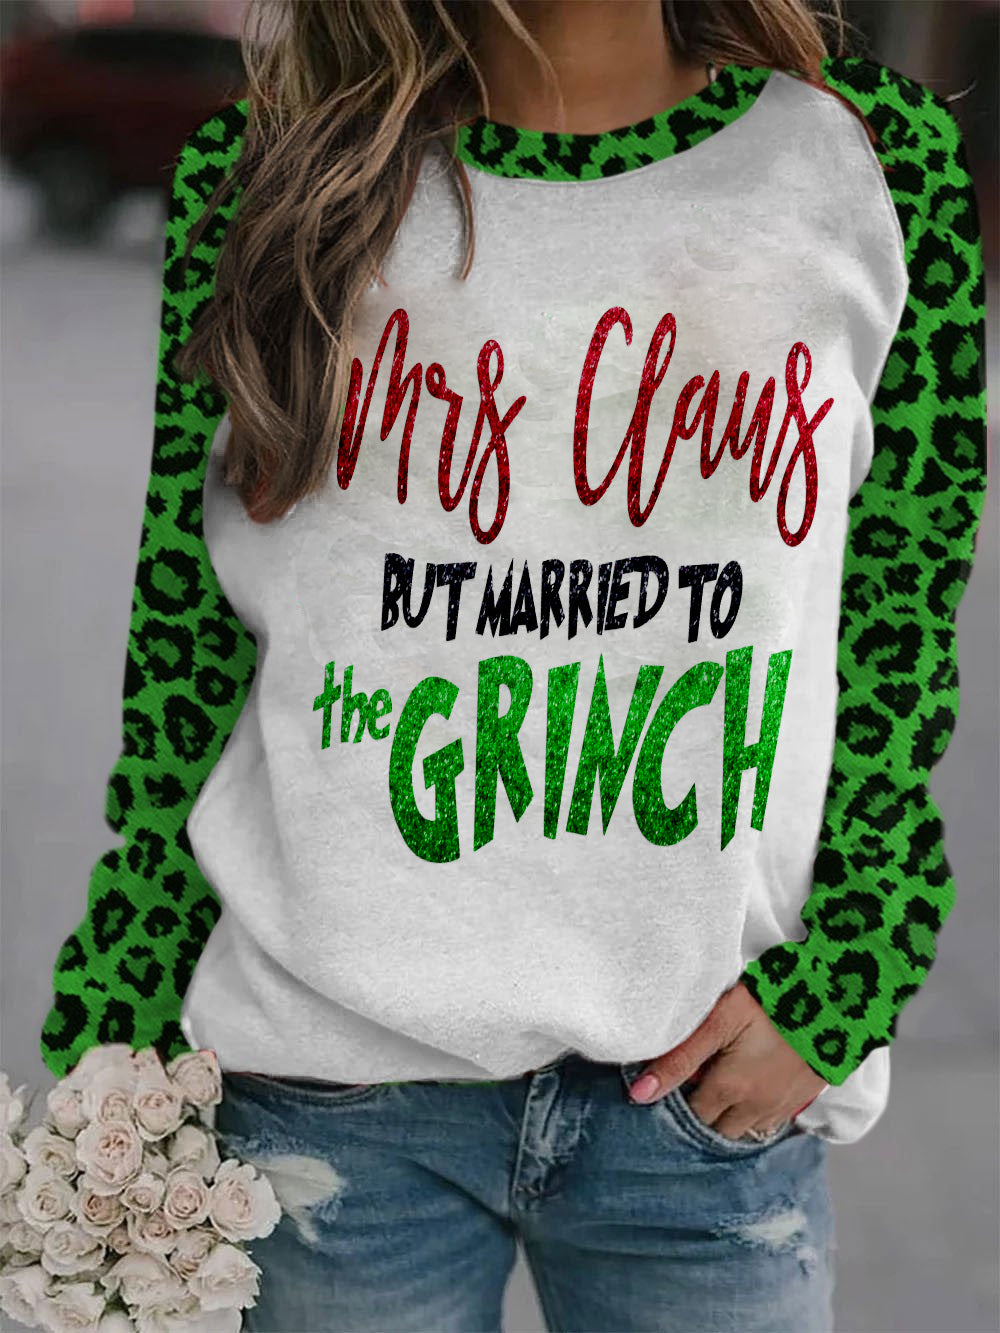 Mrs. Claus But Married To The Grinch Print Sweatshirt